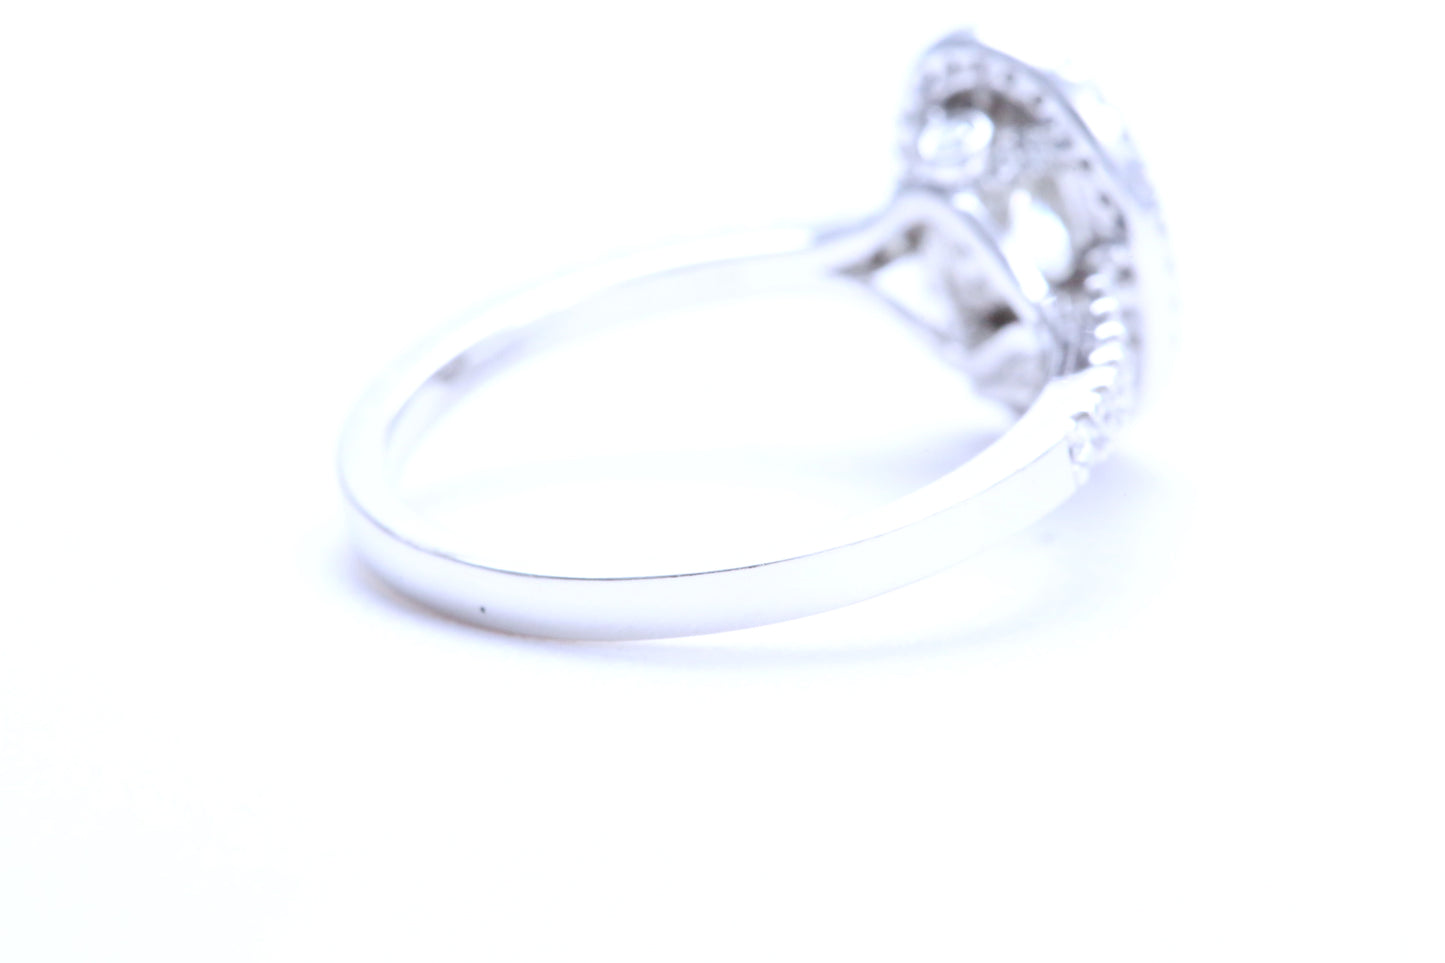 3/4 Carat Oval Shaped Engagement Ring